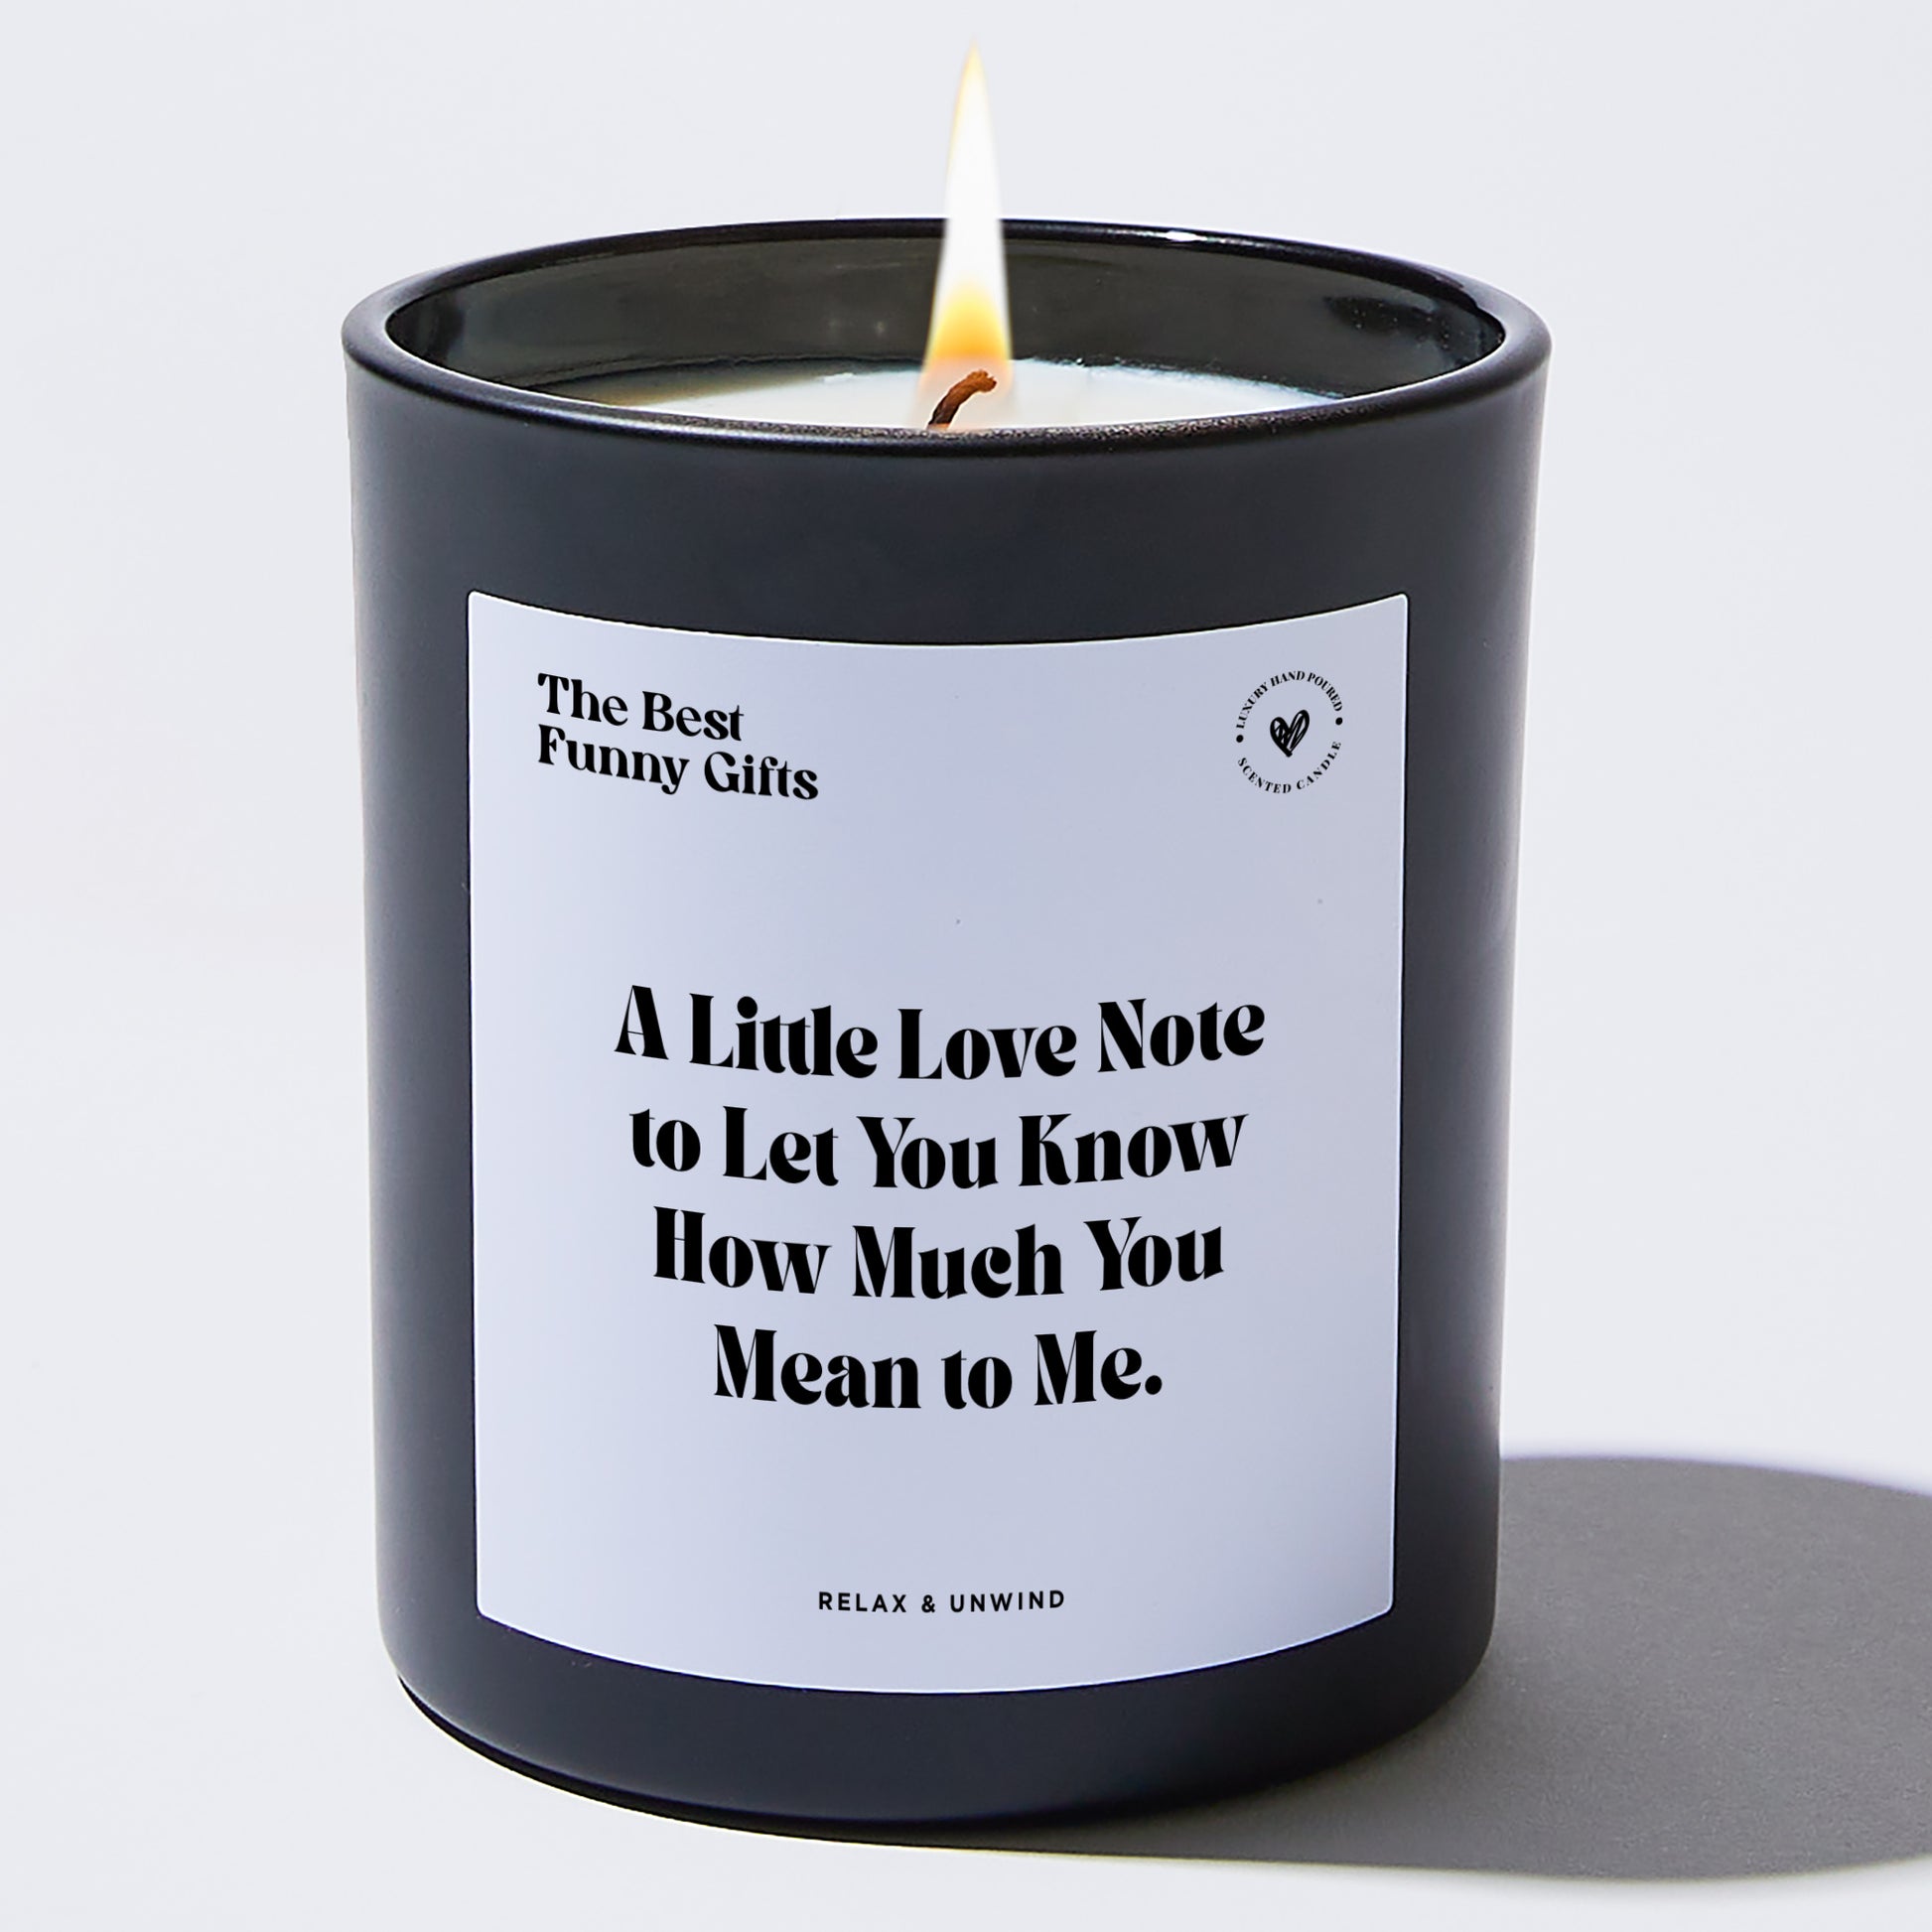 Anniversary A Little Love Note to Let You Know How Much You Mean to Me. - The Best Funny Gifts